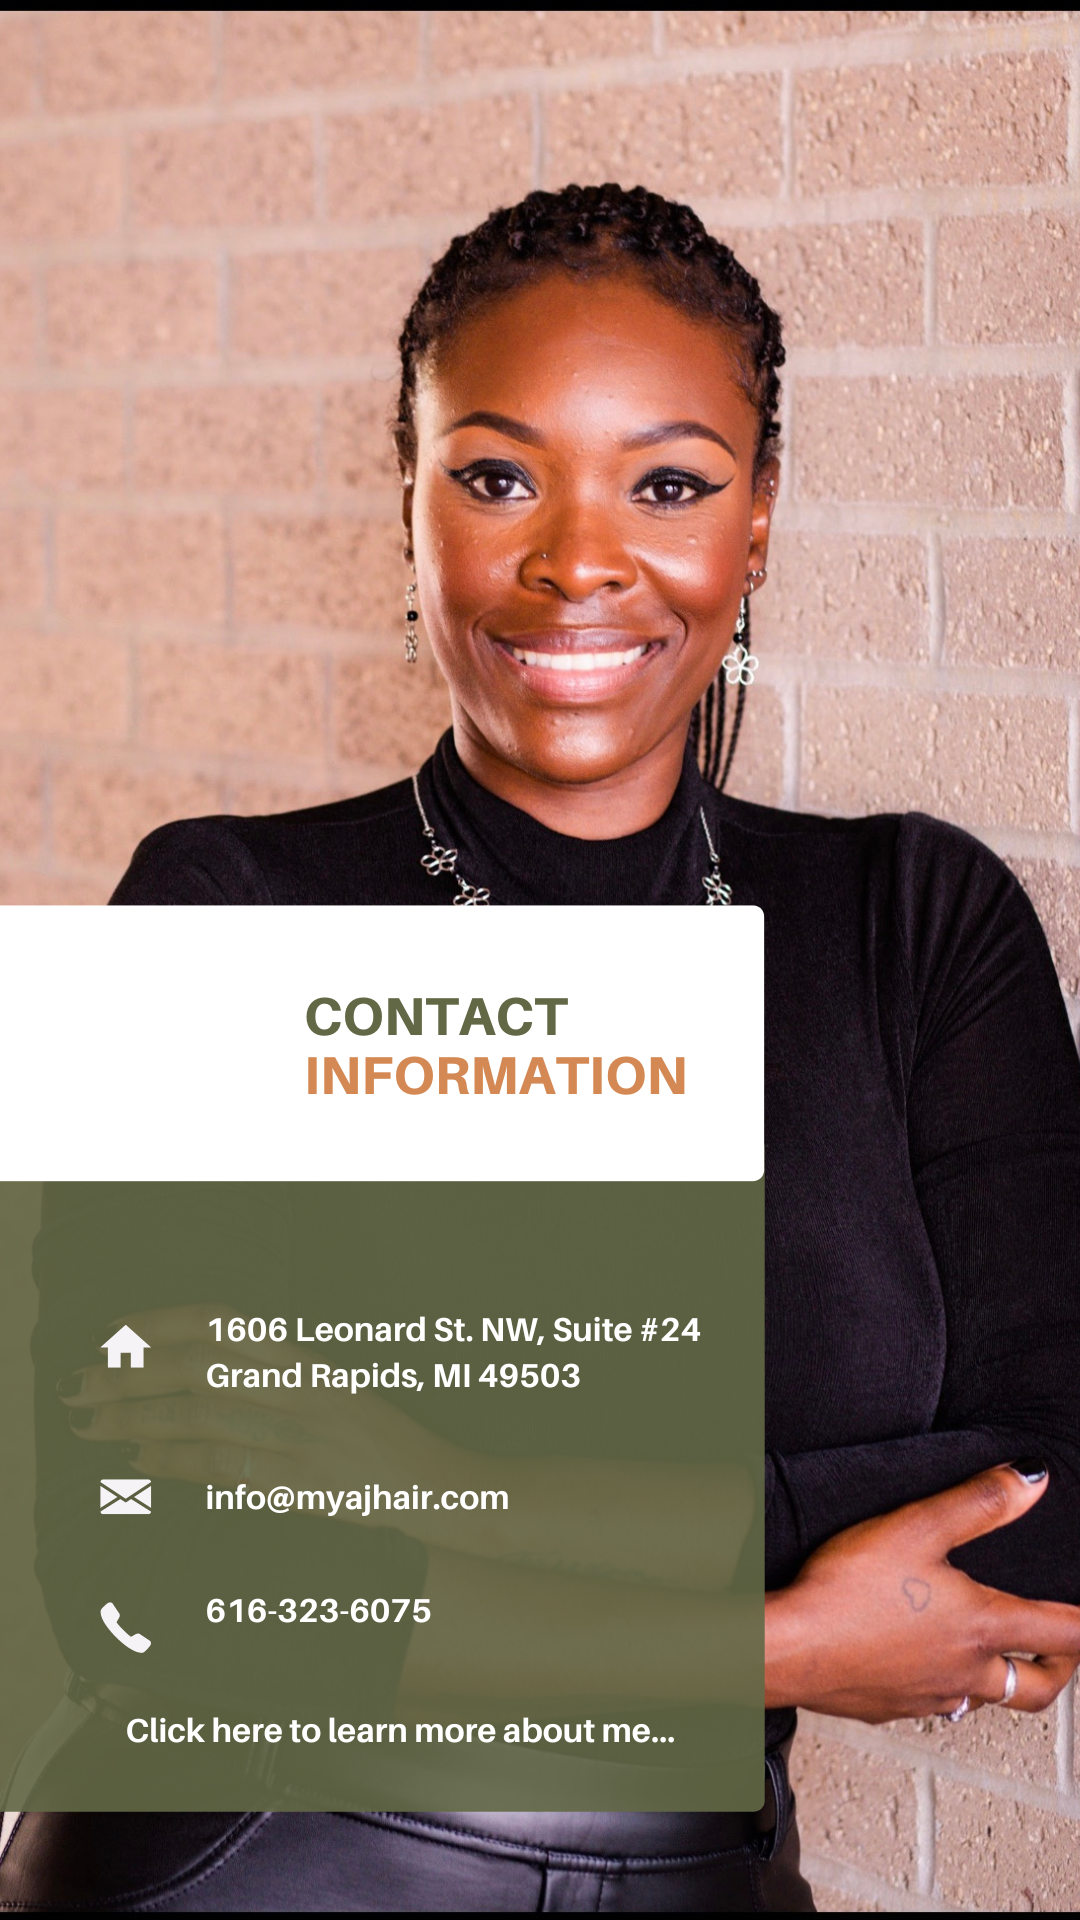 a photo of the owner with contact information.